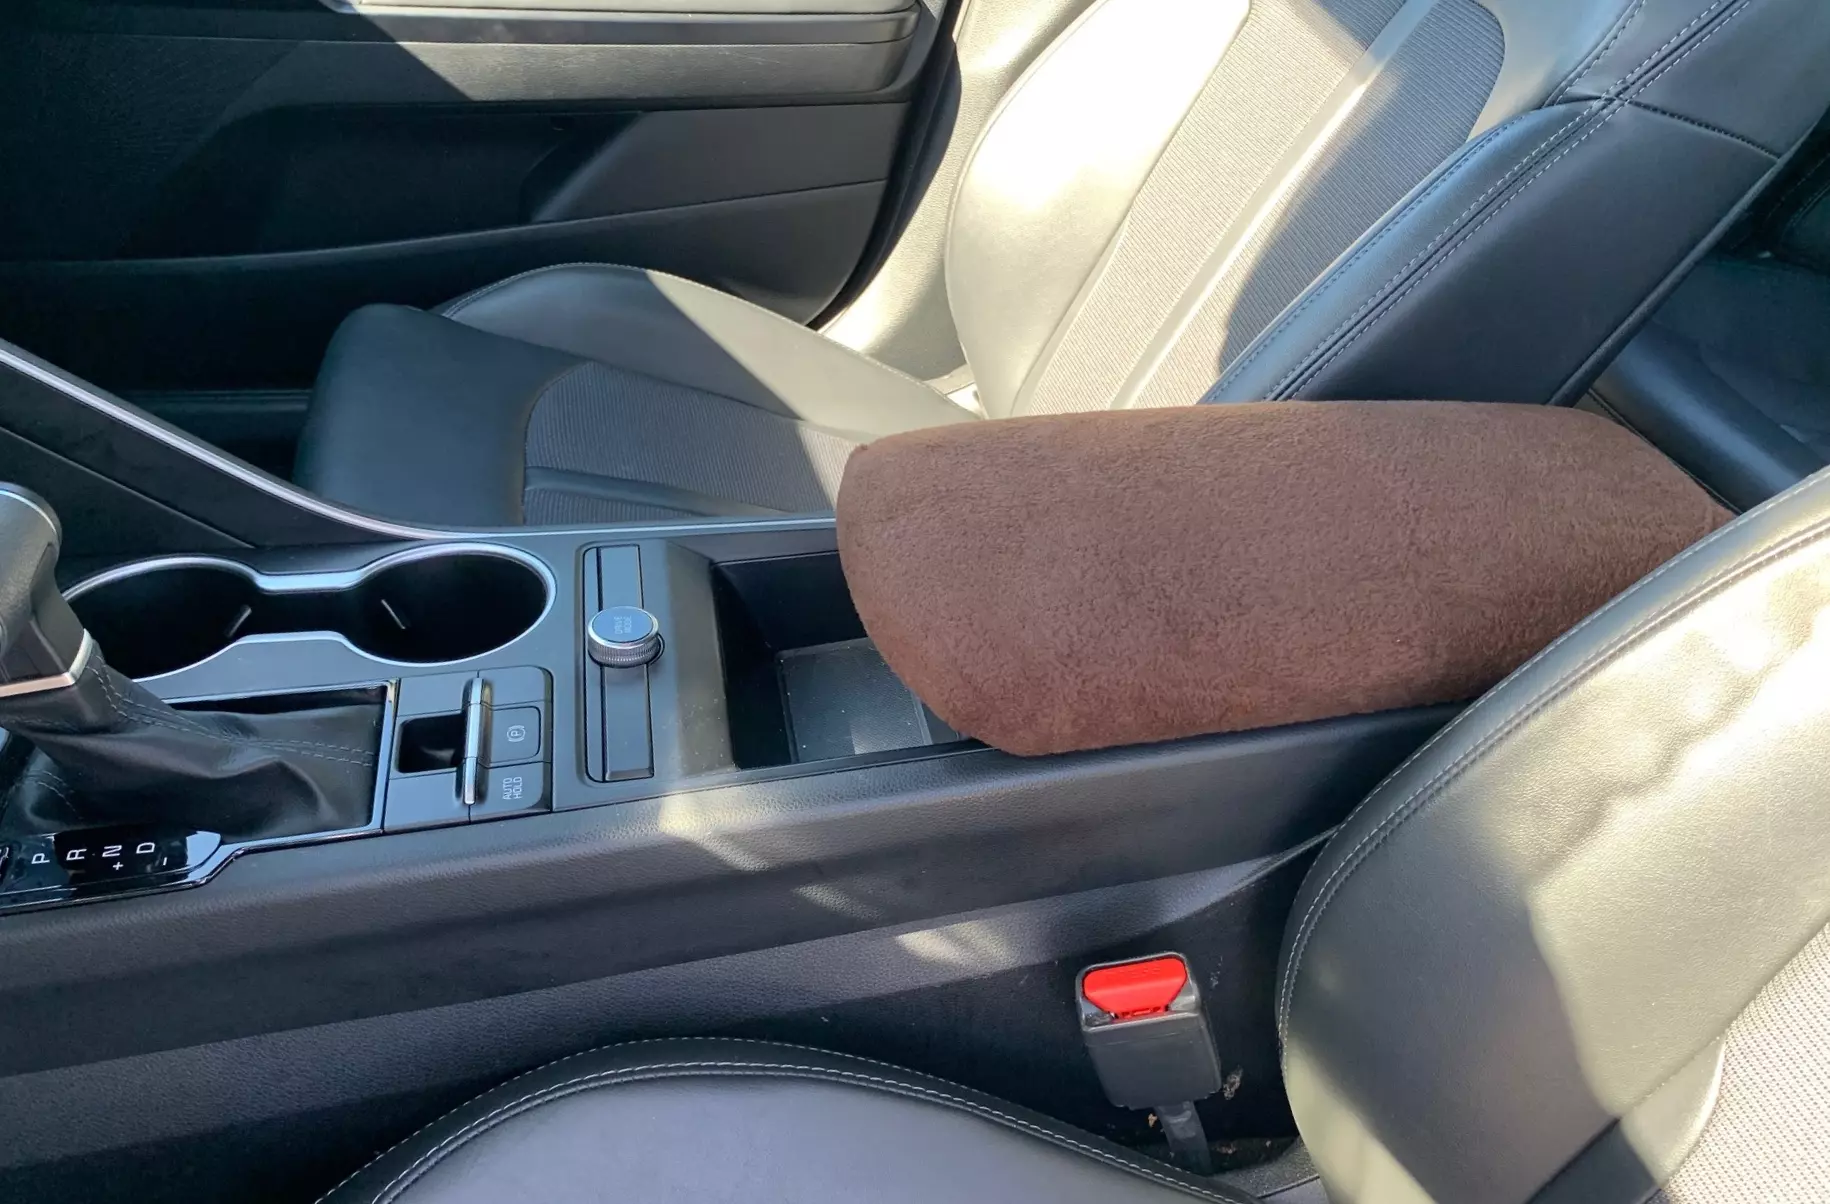 Buy Center Console Armrest Cover fits the Kia K5 2021-2022- Fleece Material